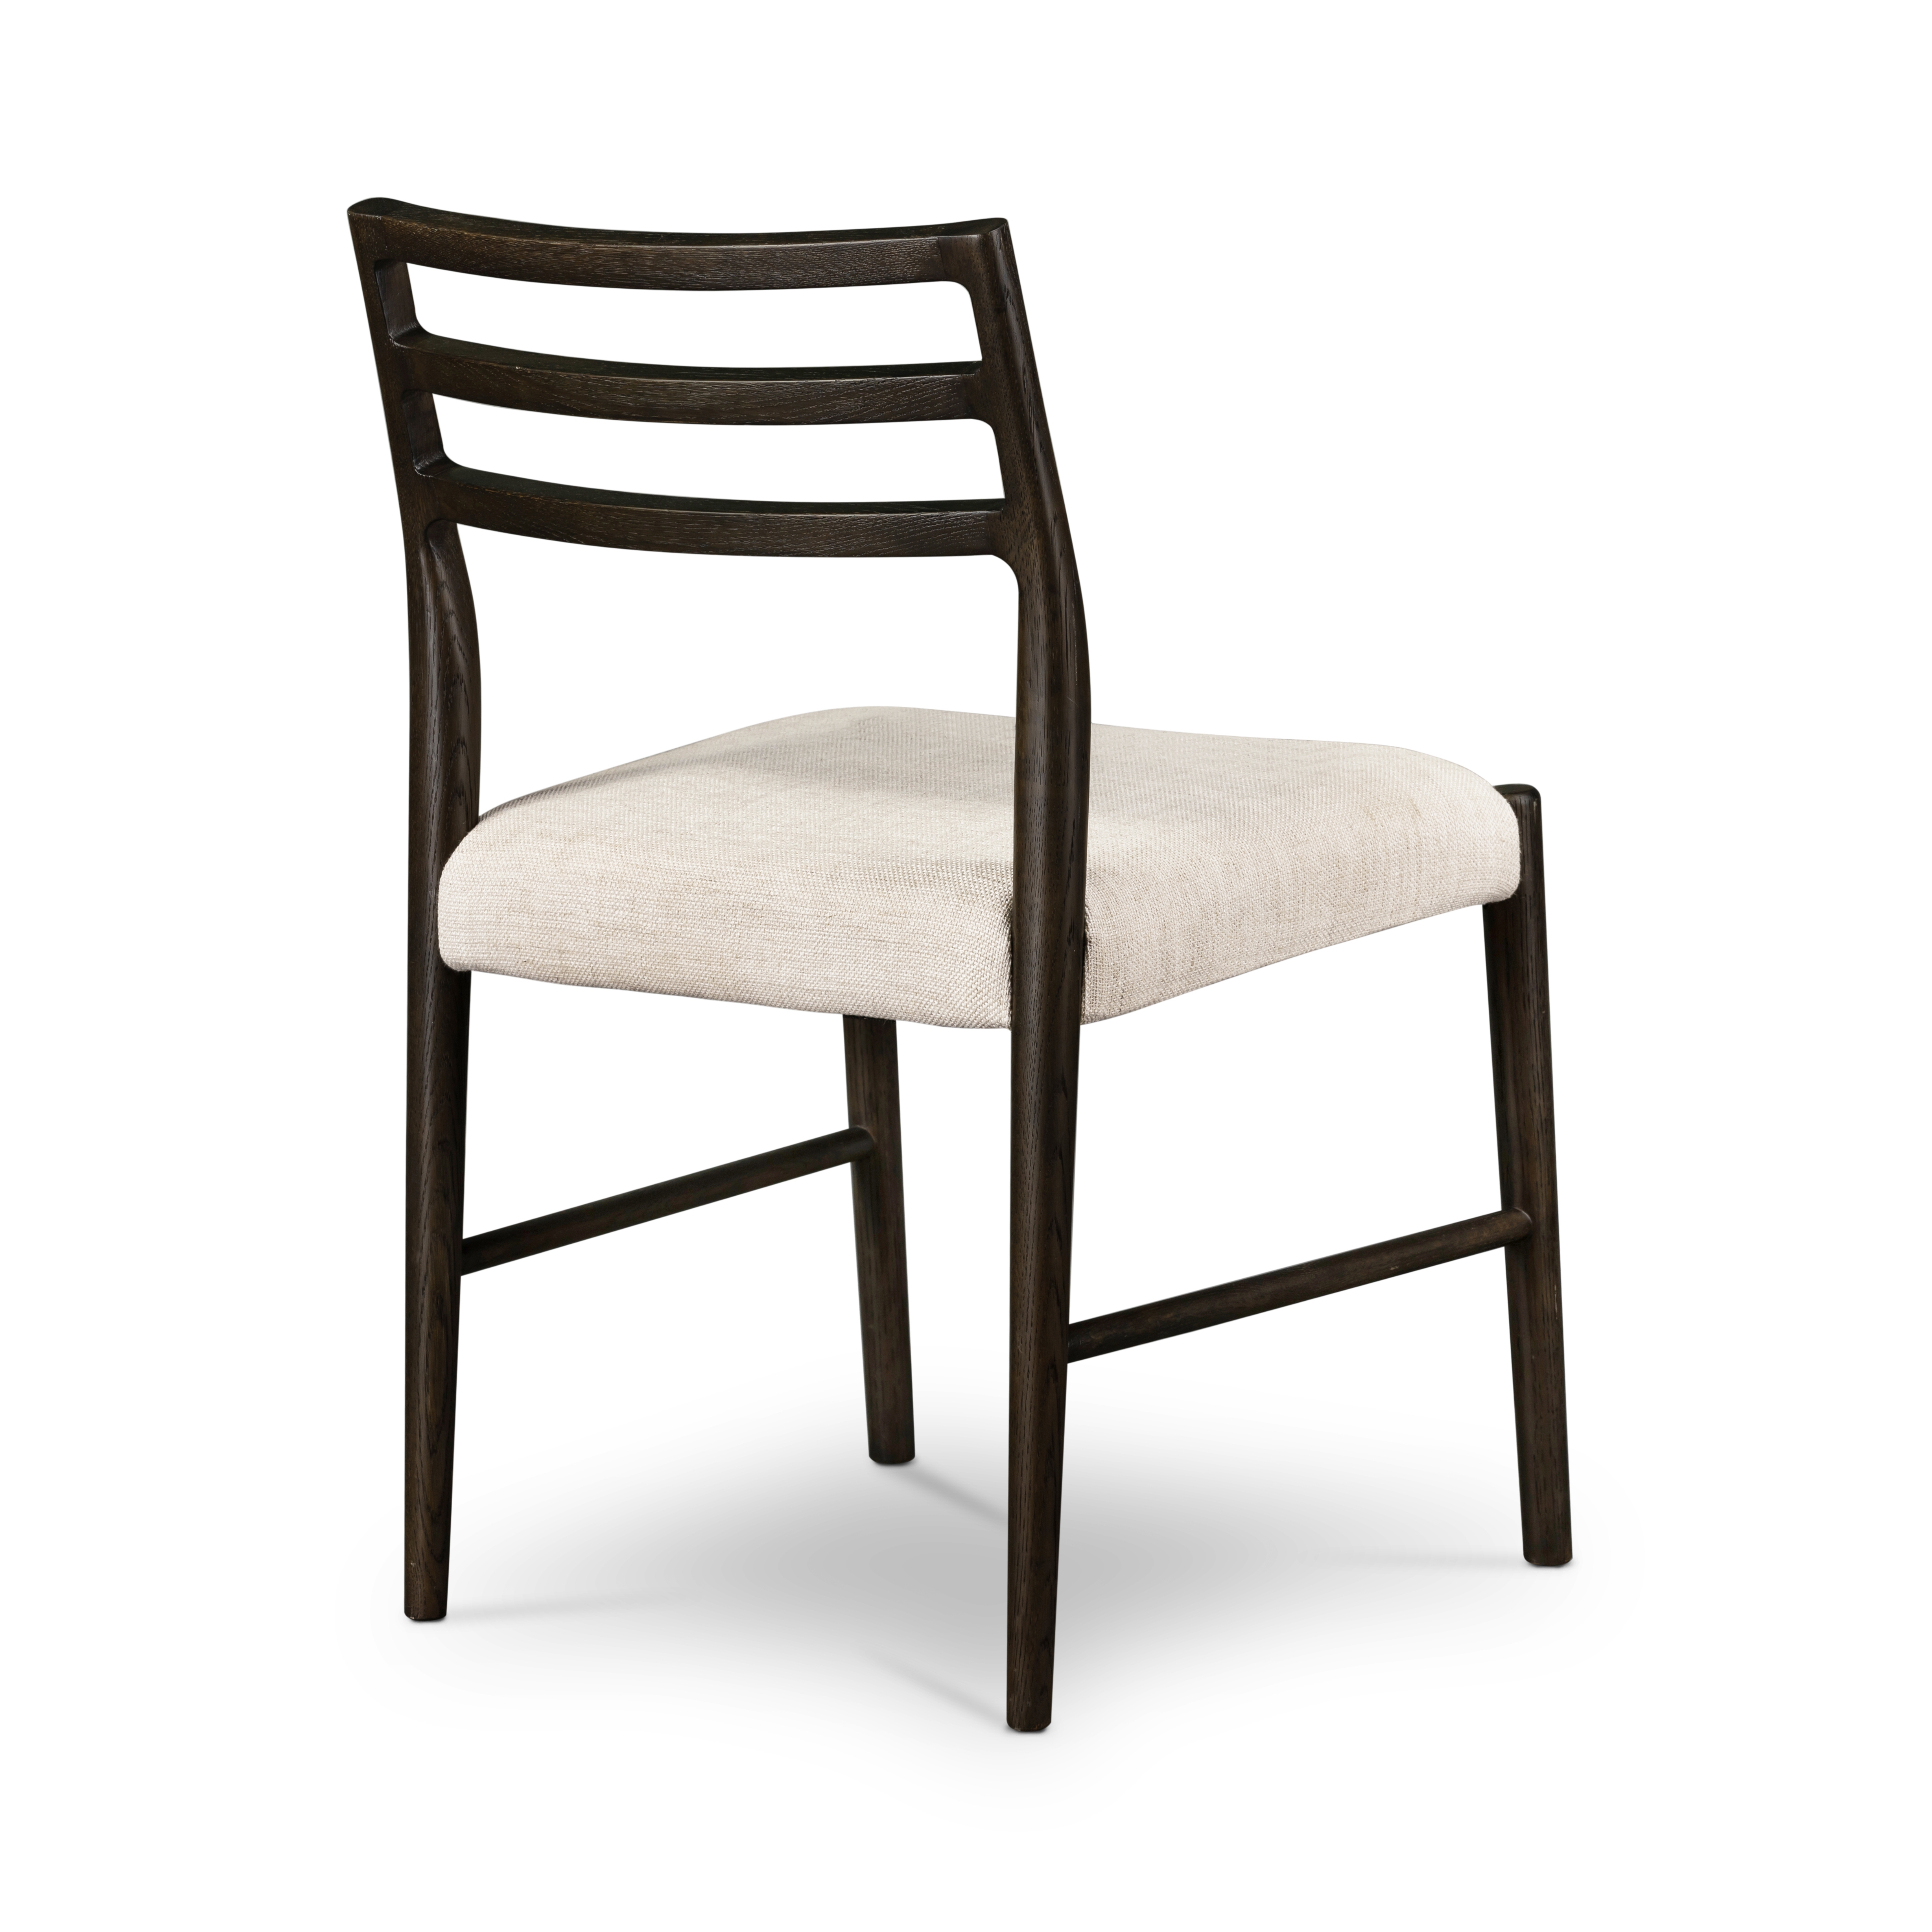 Glenmore Dining Chair-Essence Natural - Image 1